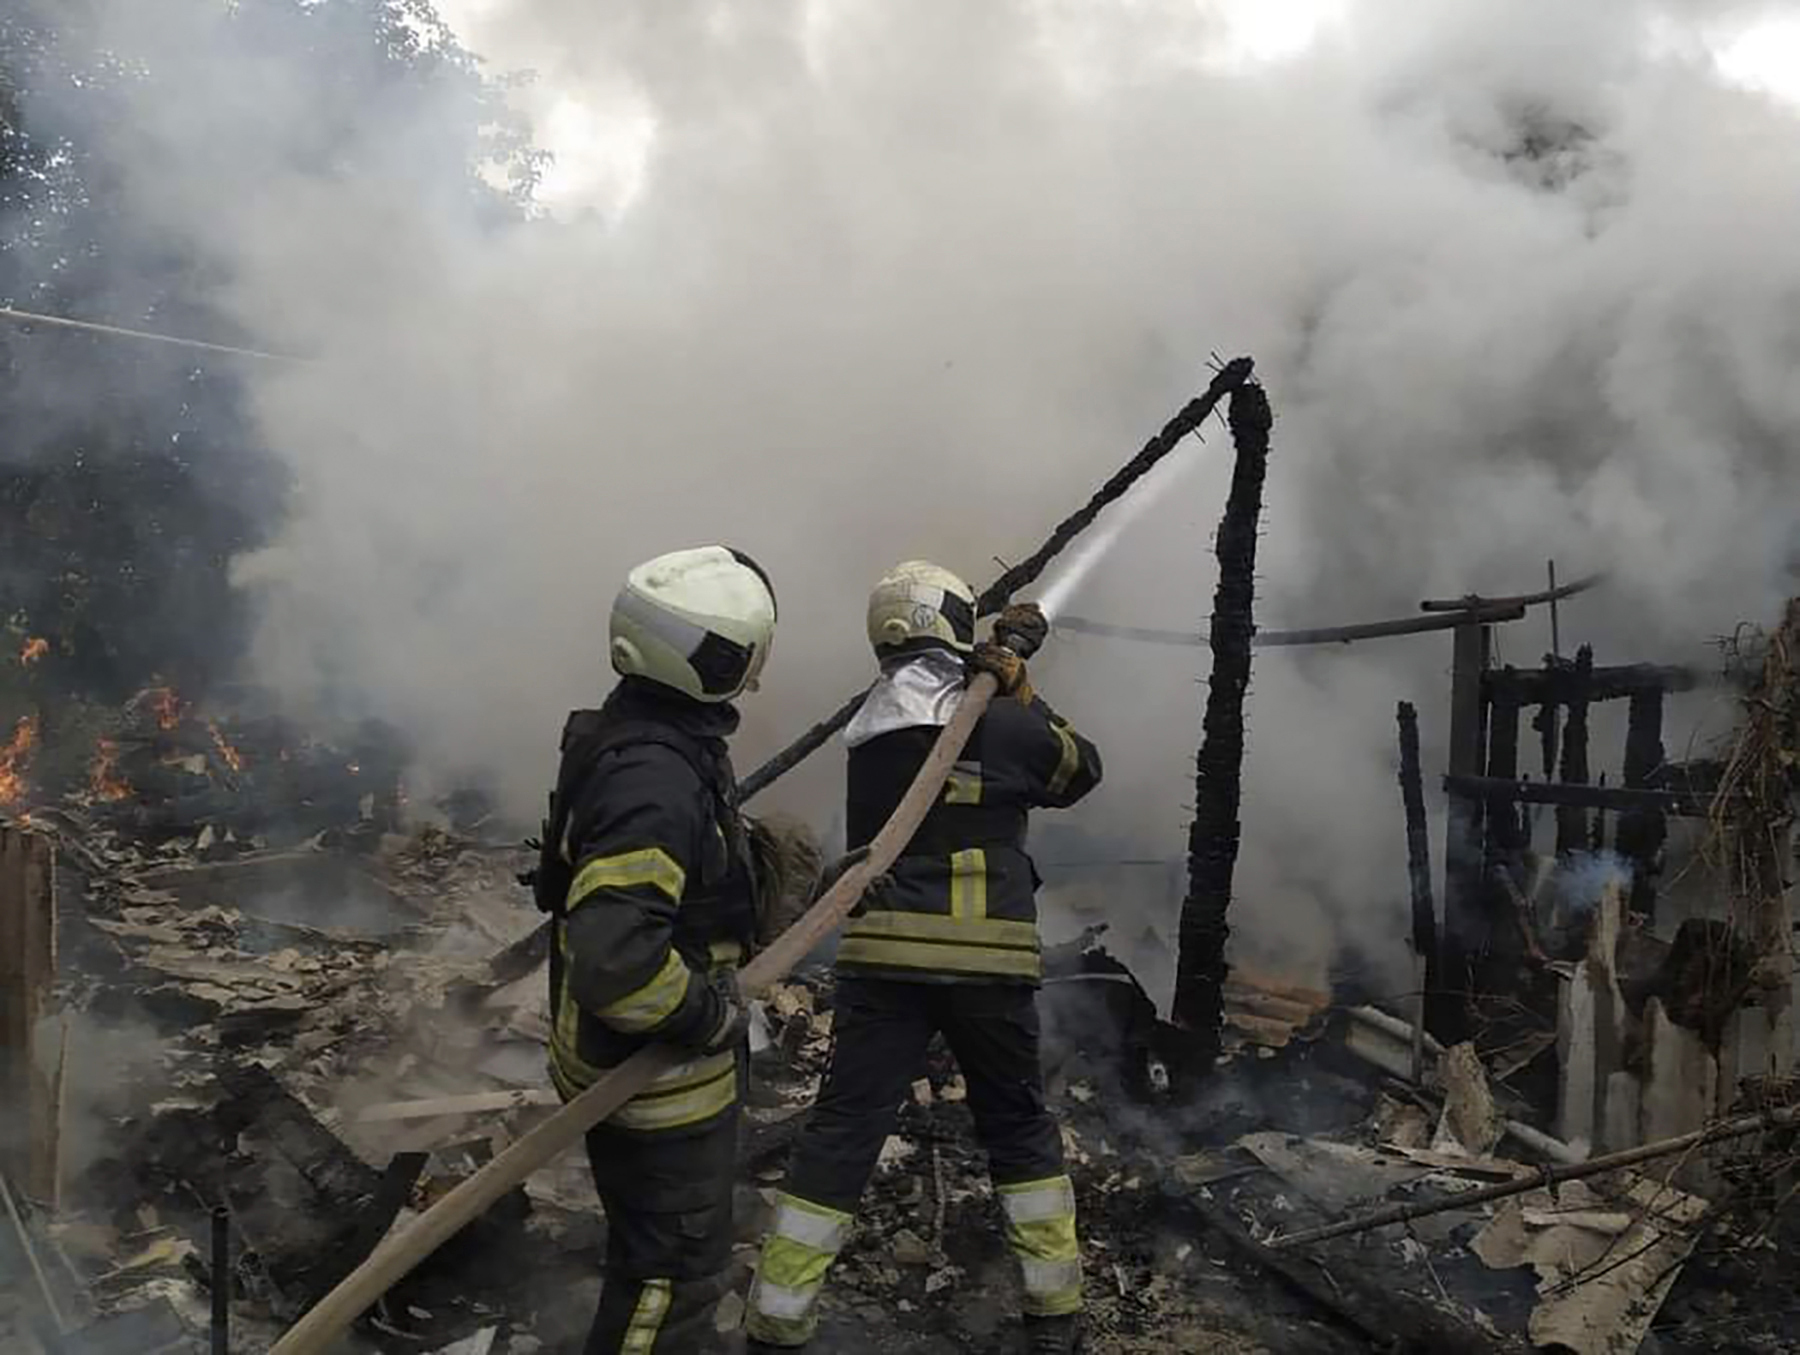 Ukrainian firefighters work to extinguish a fire at a damaged residential building in Lysychansk, on Sunday.